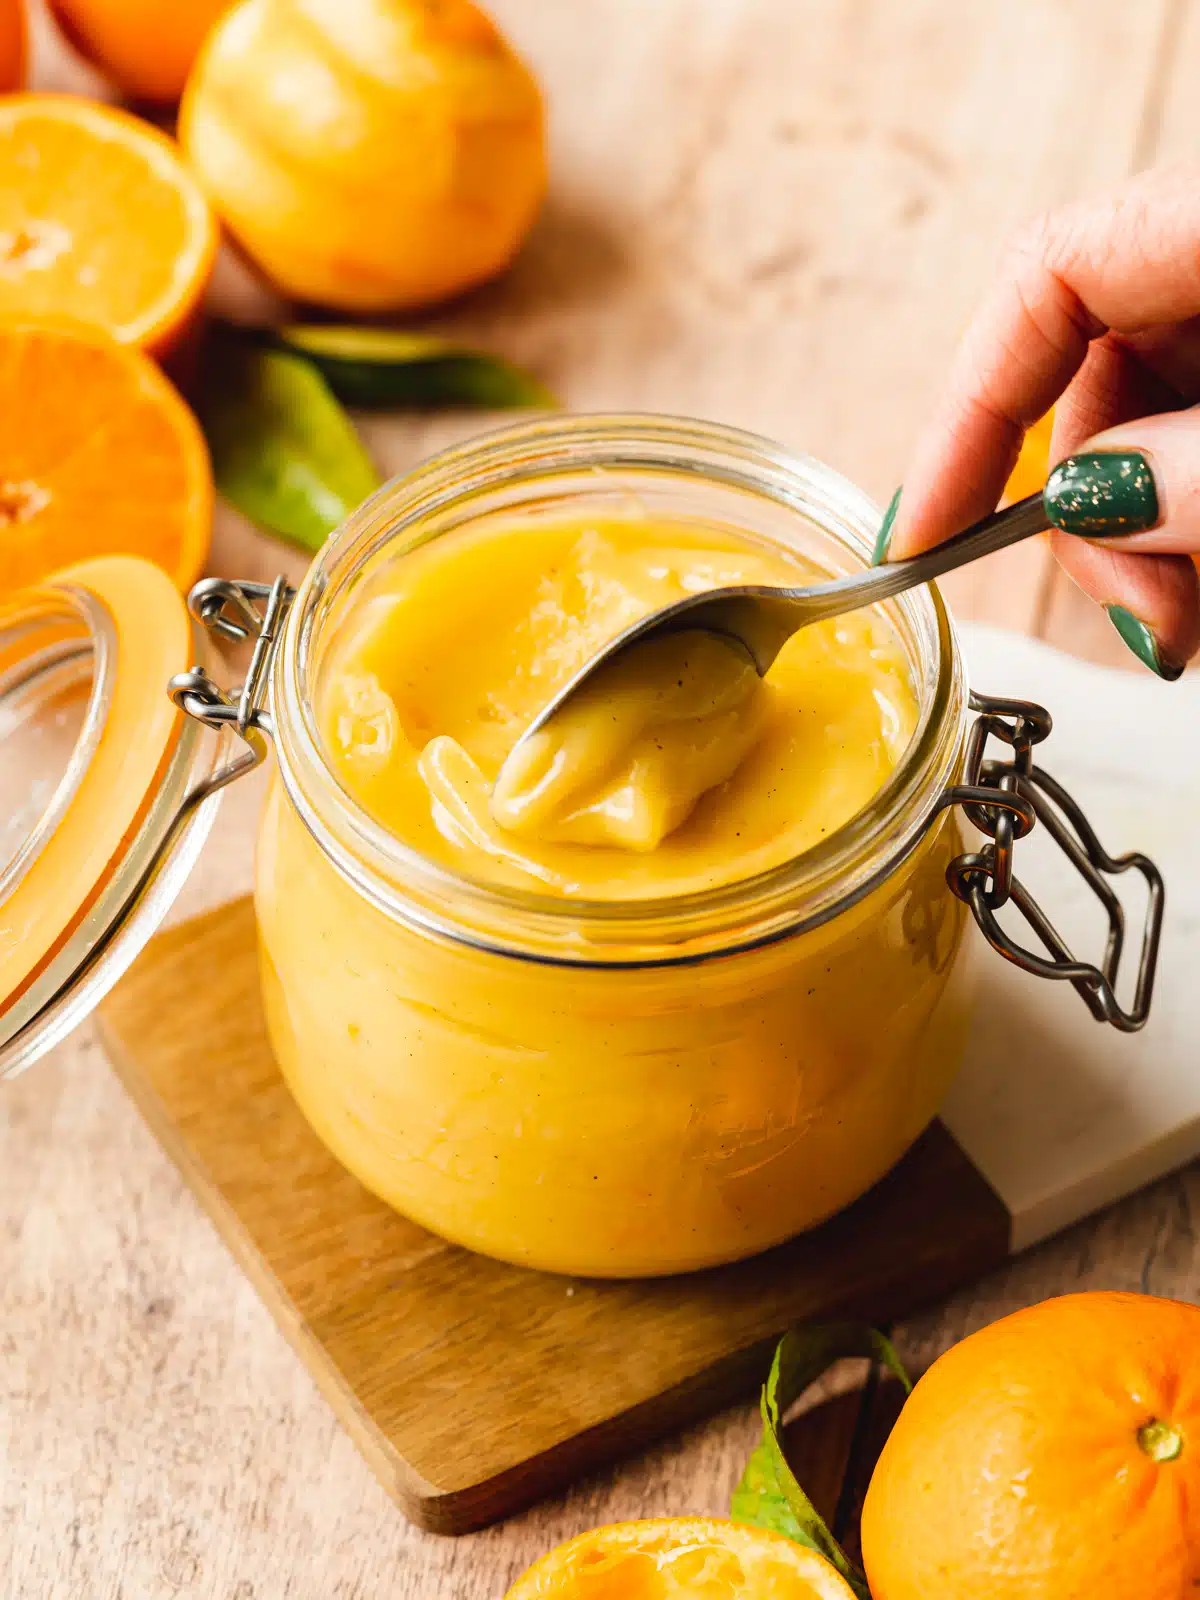 orange curd in a jar being scooped out with a spoon.